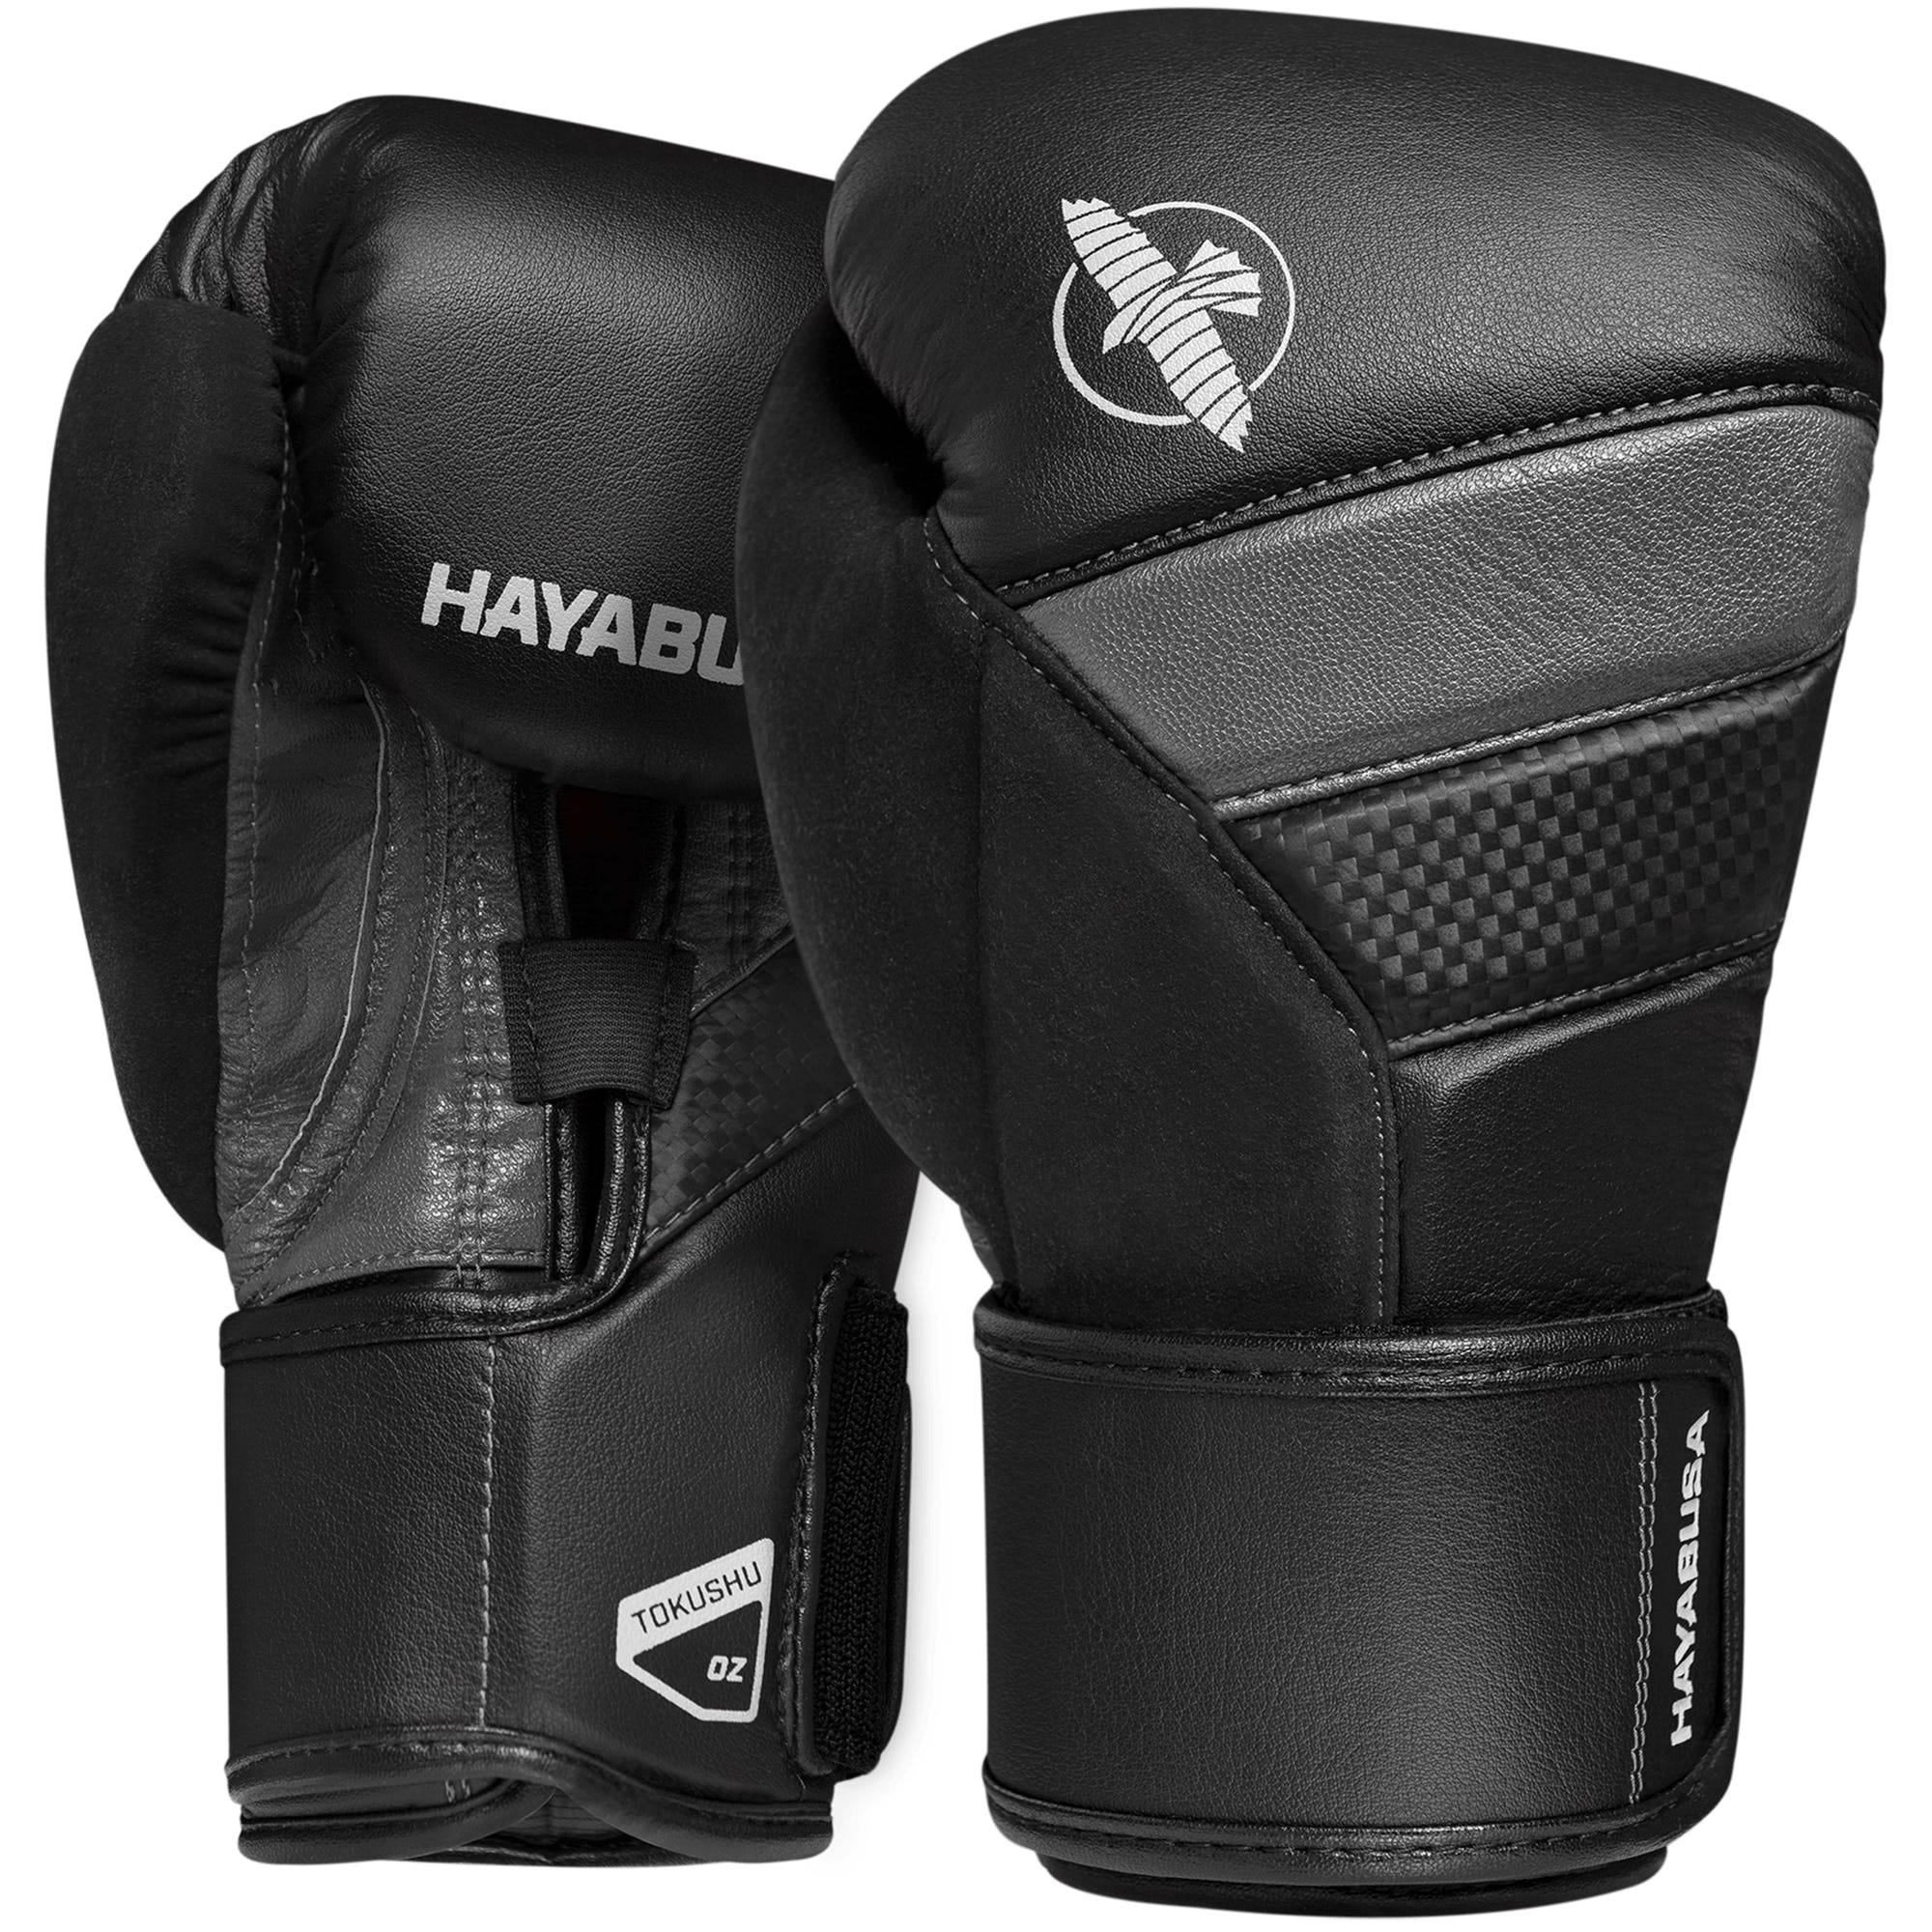 Hayabusa | Boxing Gloves - T3 - CLEARANCE - XTC Fitness - Exercise Equipment Superstore - Canada - Boxing Gloves